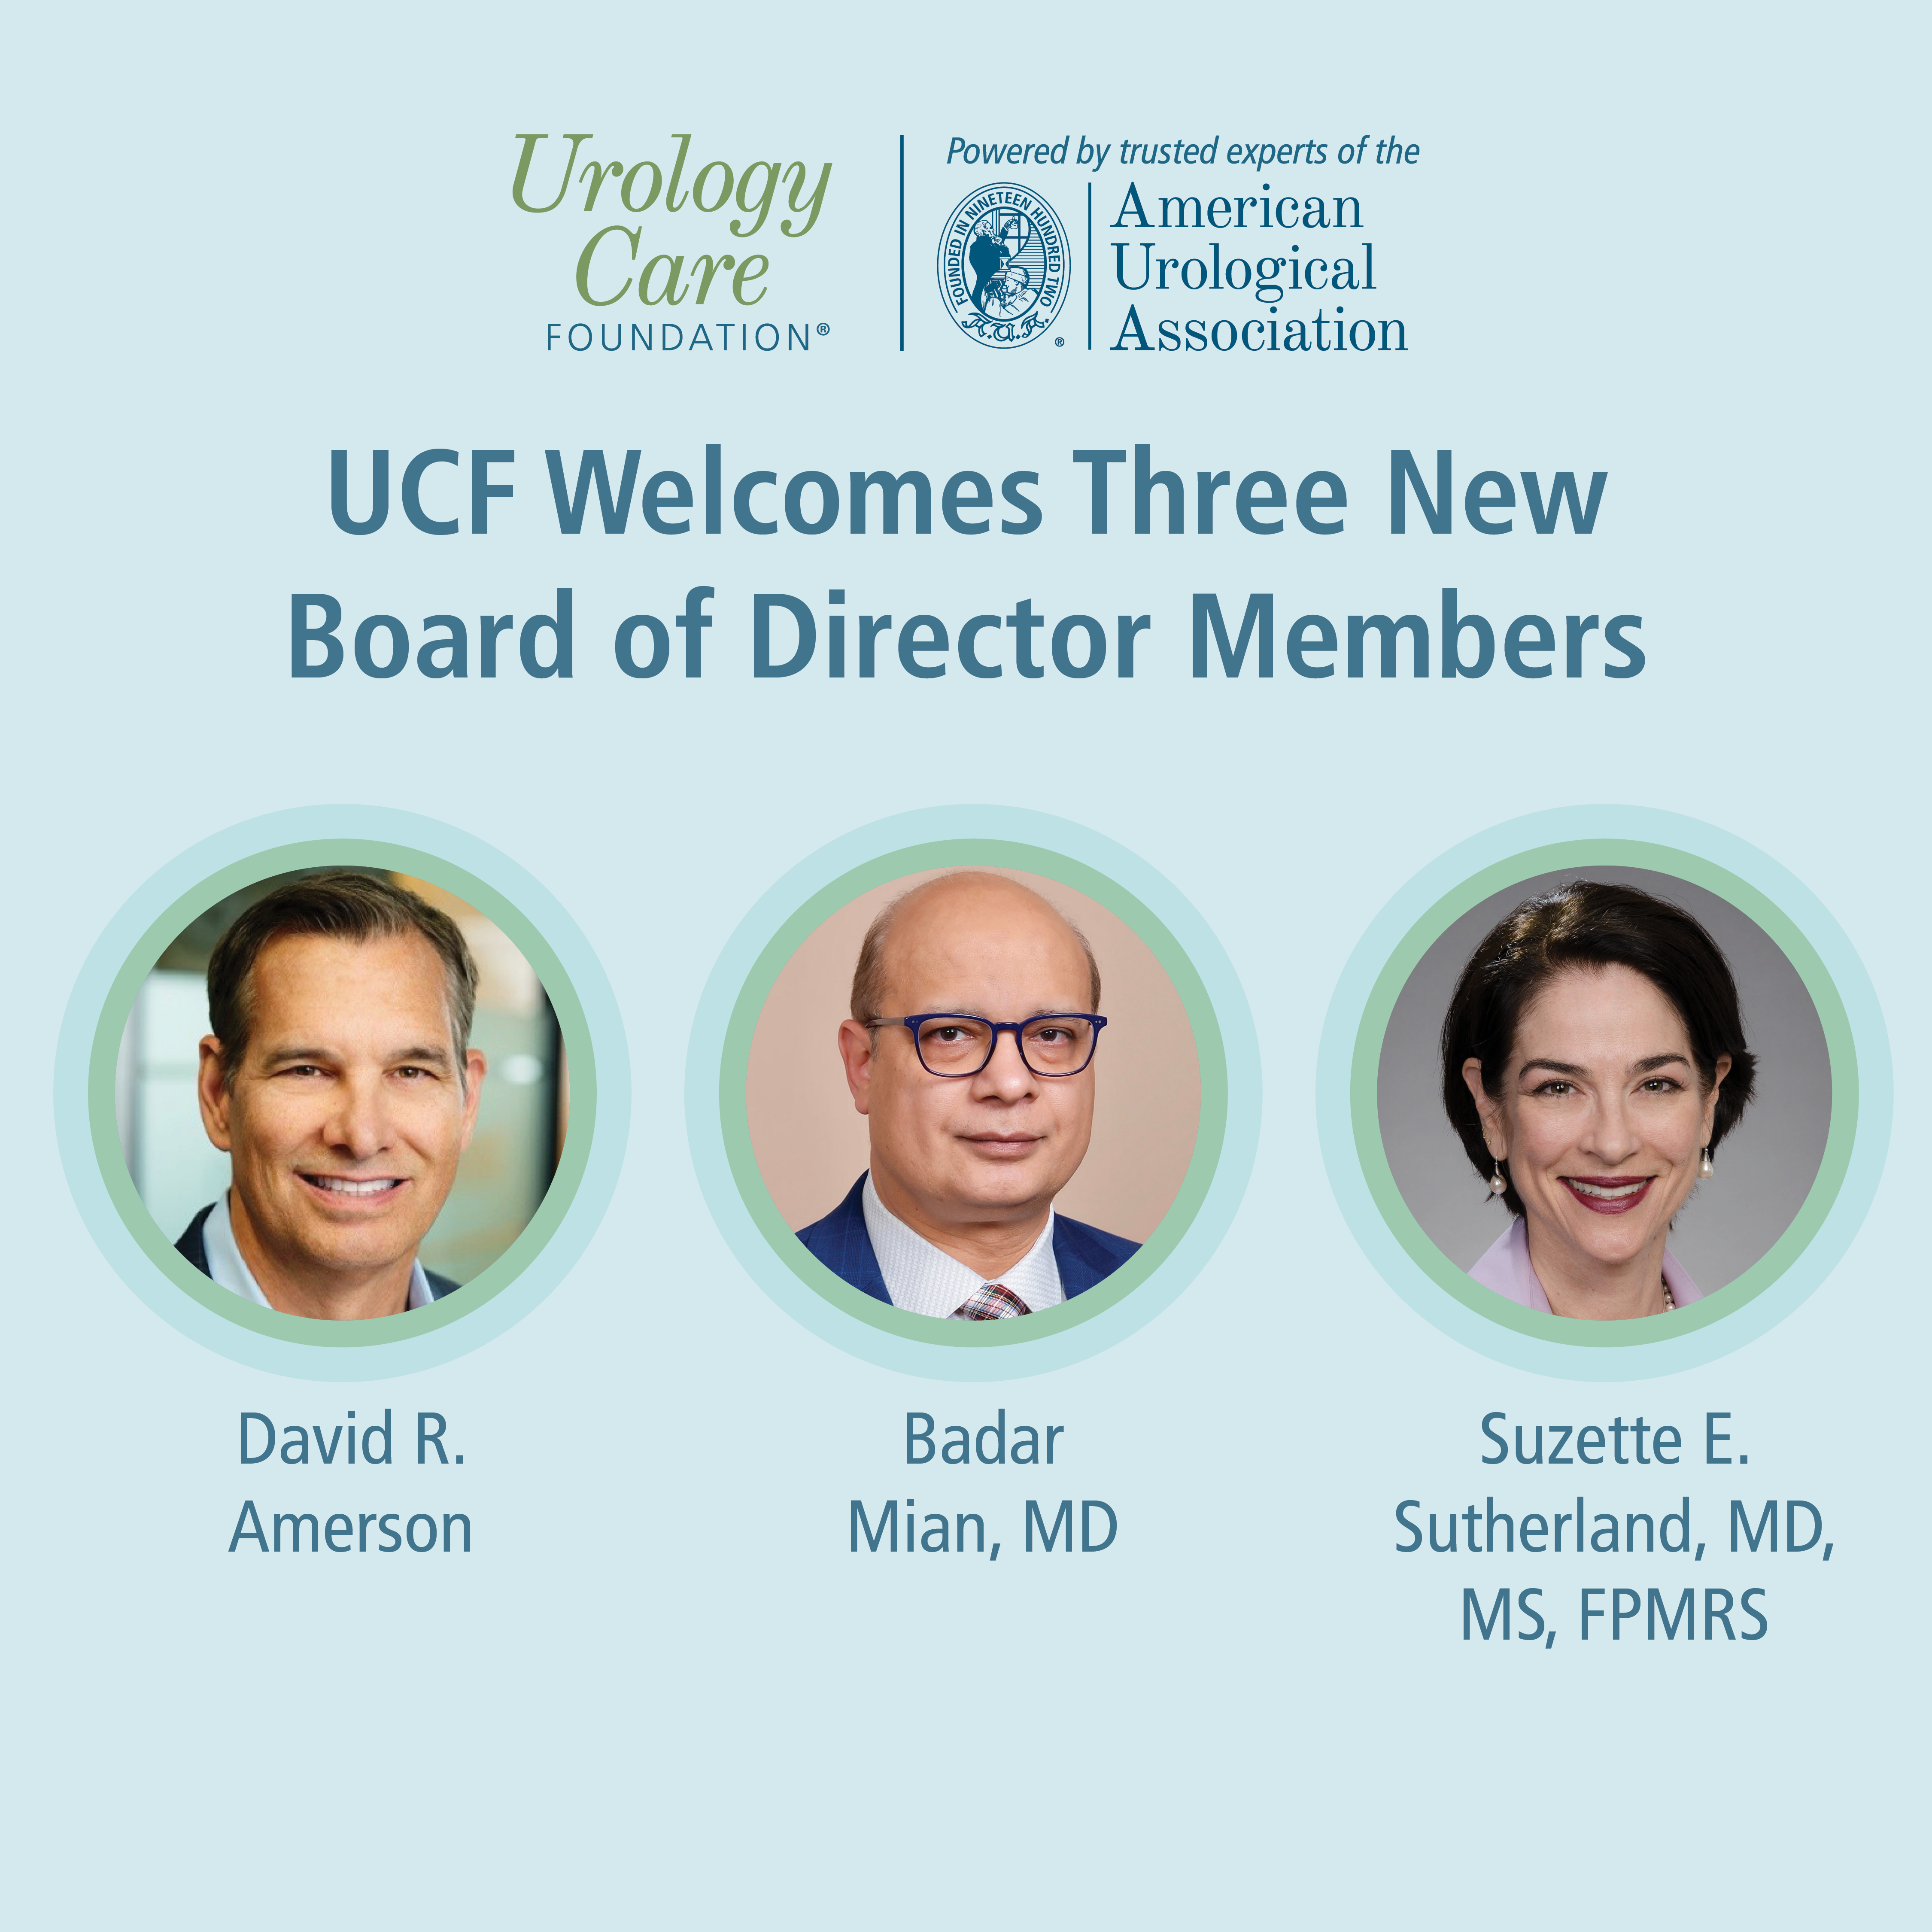 UCF Welcomes Three New Board of Director Members